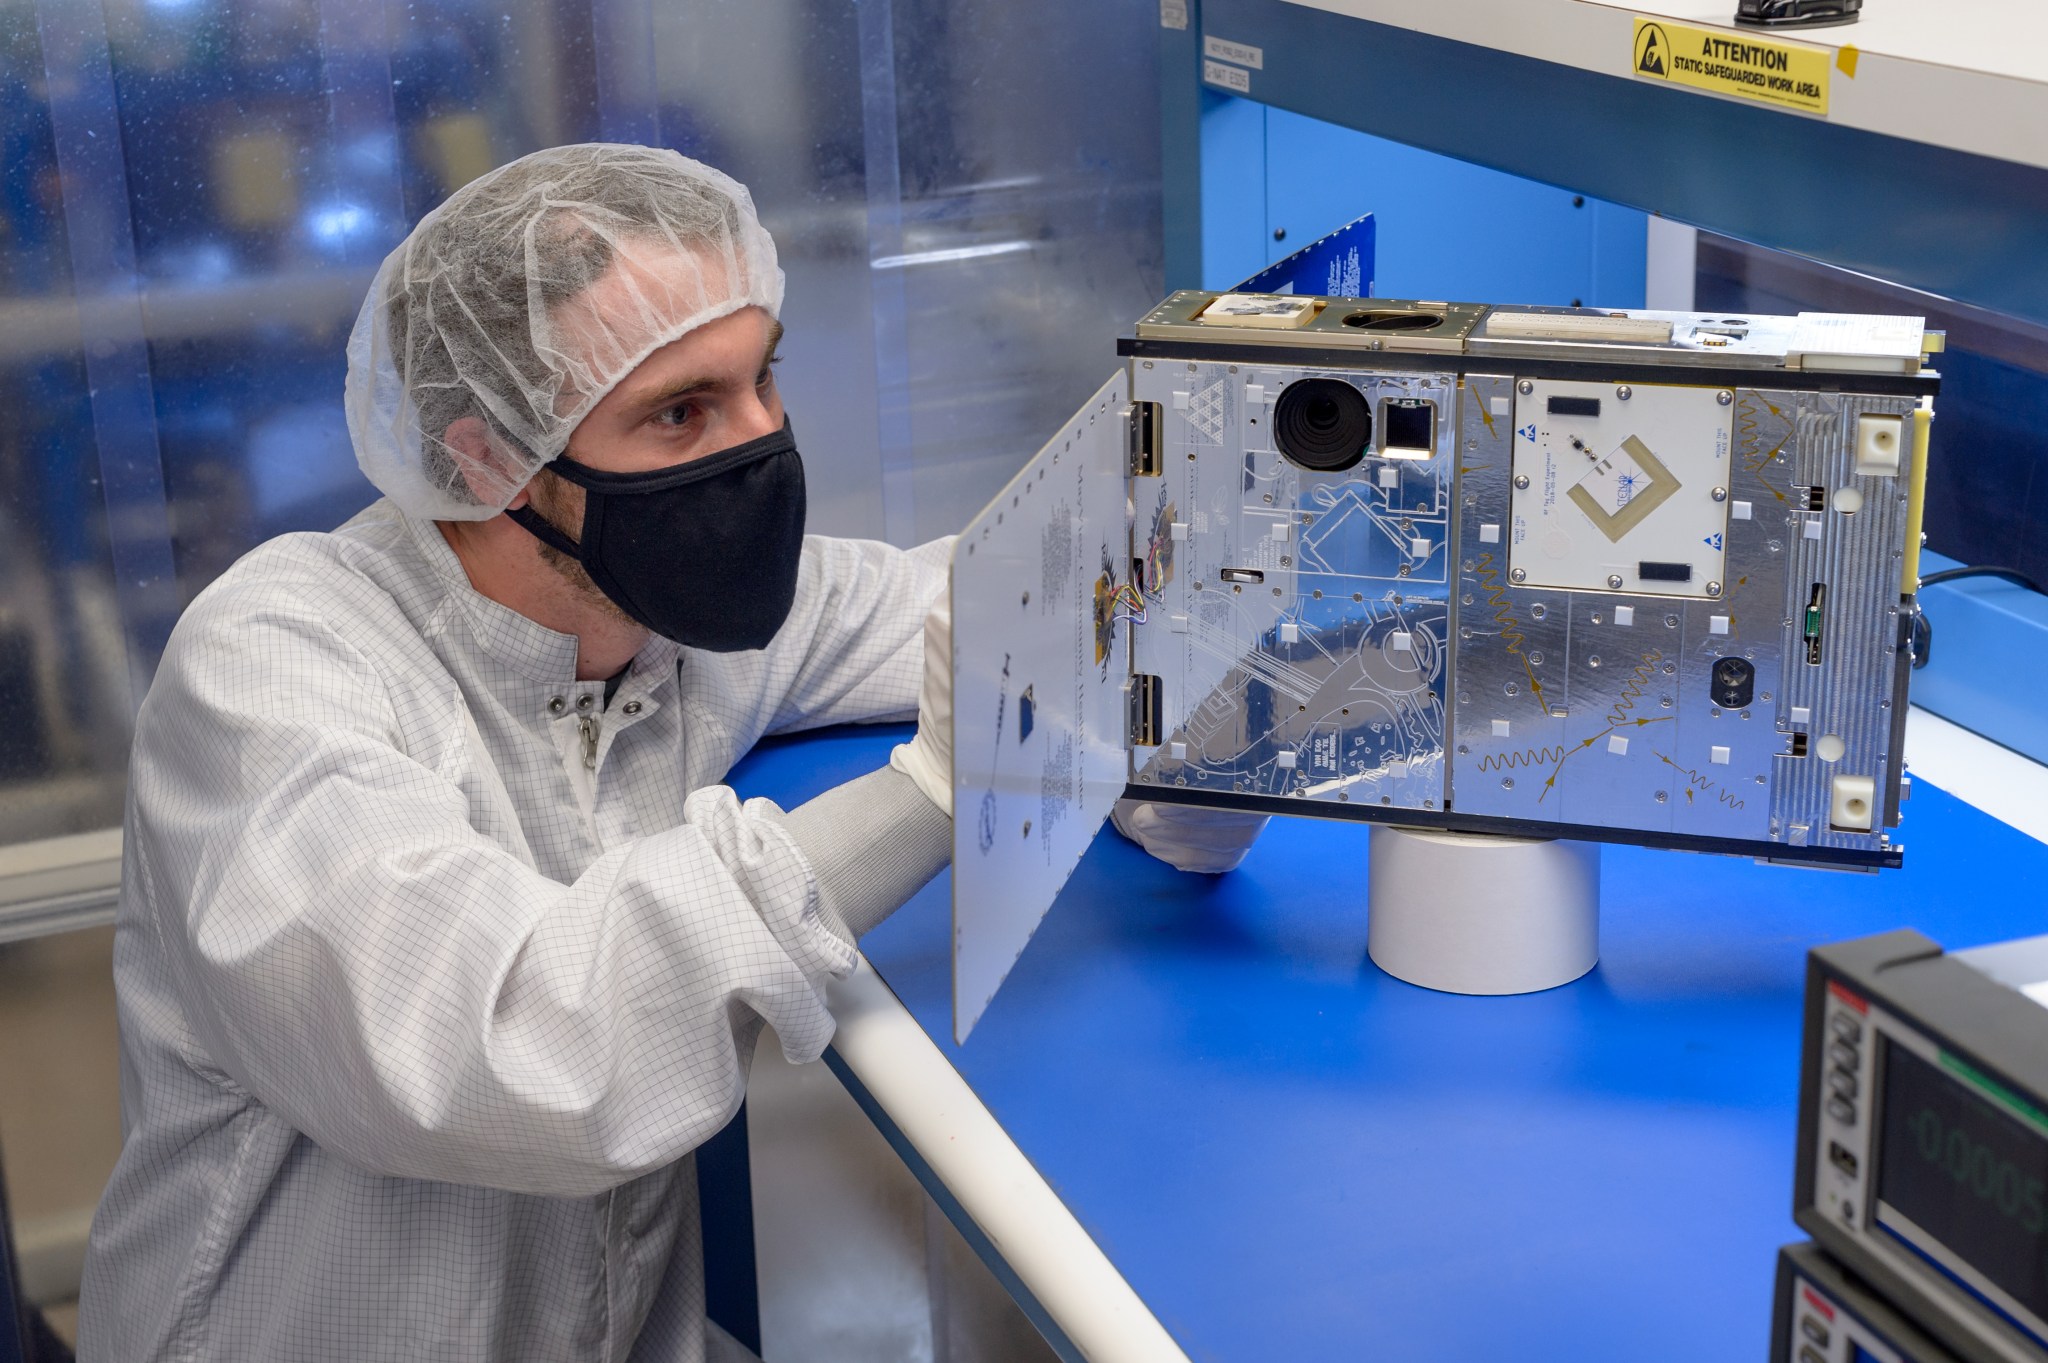 A person in a white clean-suit and hair net and black mask is crouched down inspecting a reflective, silver CubeSat device with two panels extended from the sides.